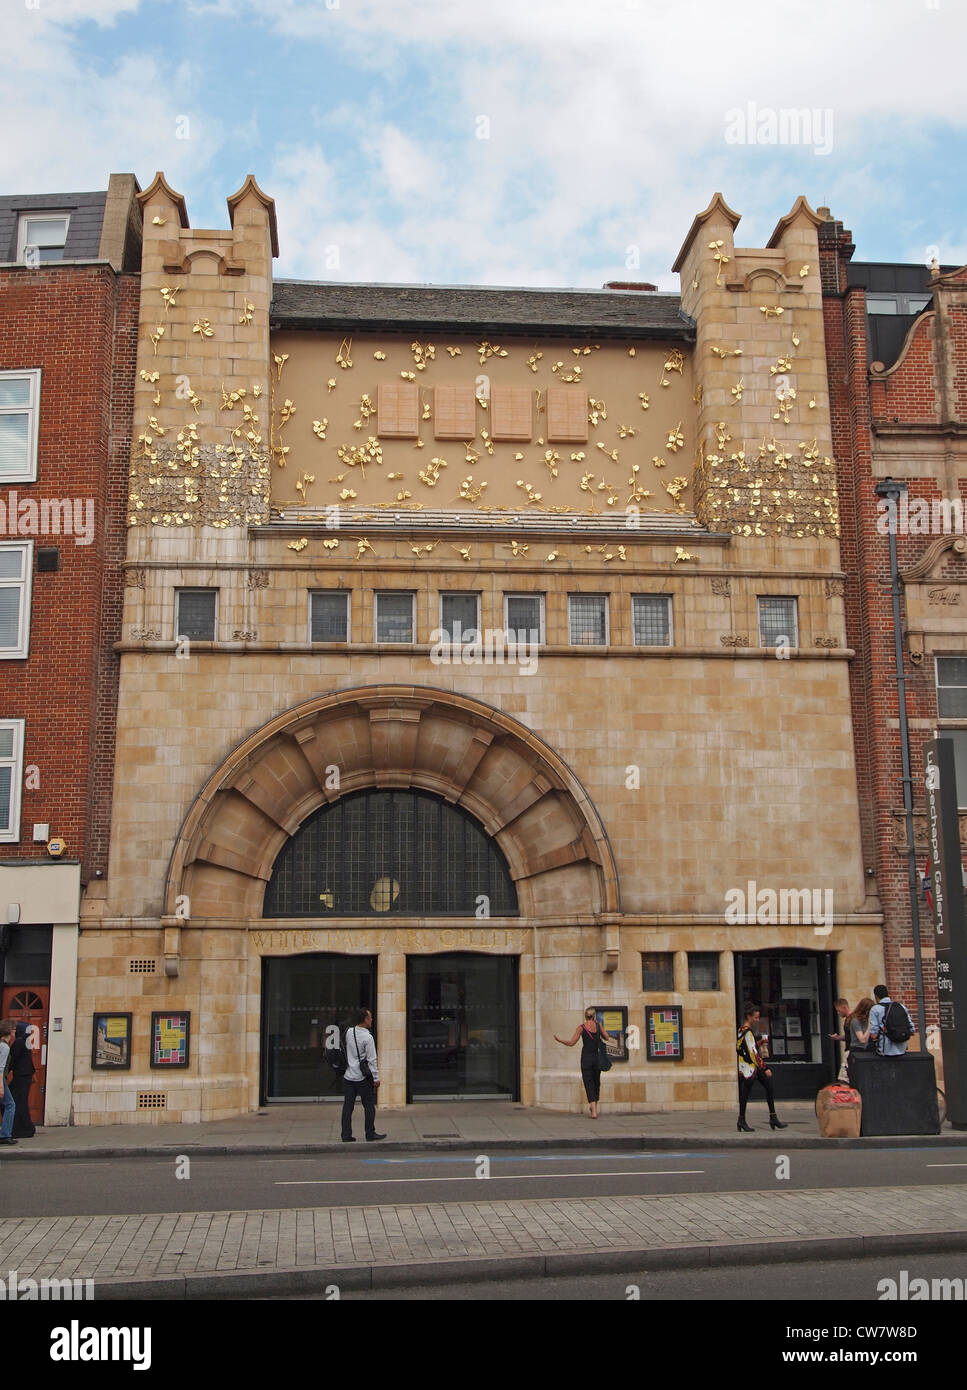 The Rachel Whiteread Frieze on the front of the Whitechapel Gallery, London - the branches and leaves are covered in gold leaf Stock Photo